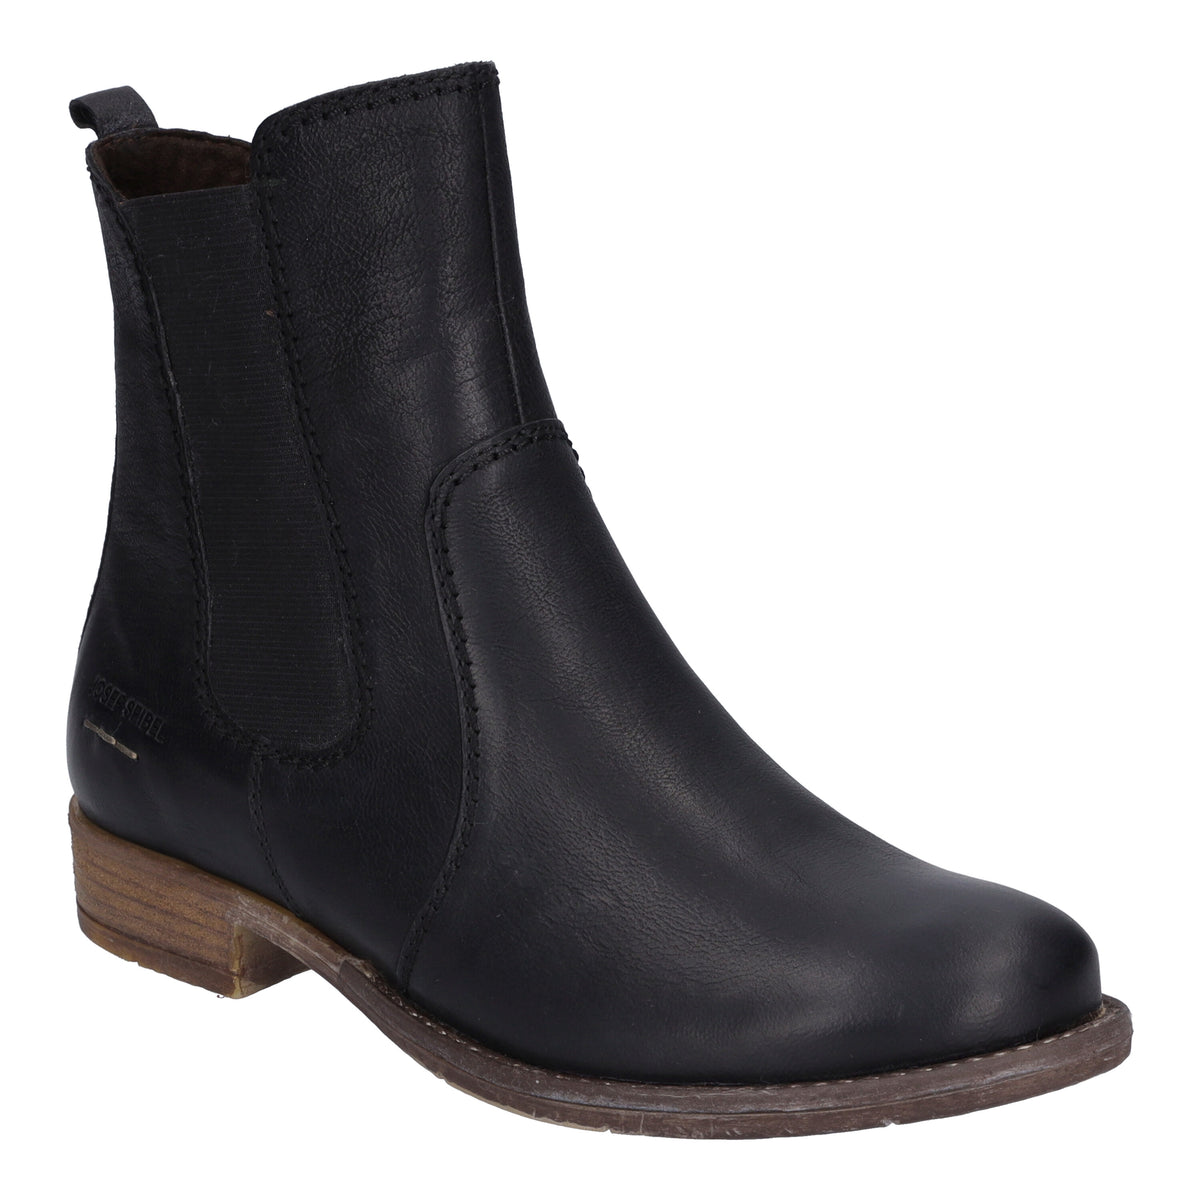 Josef Seibel Sienna 80 Black Leather Chelsea Boot 99680 – The Boot Shop